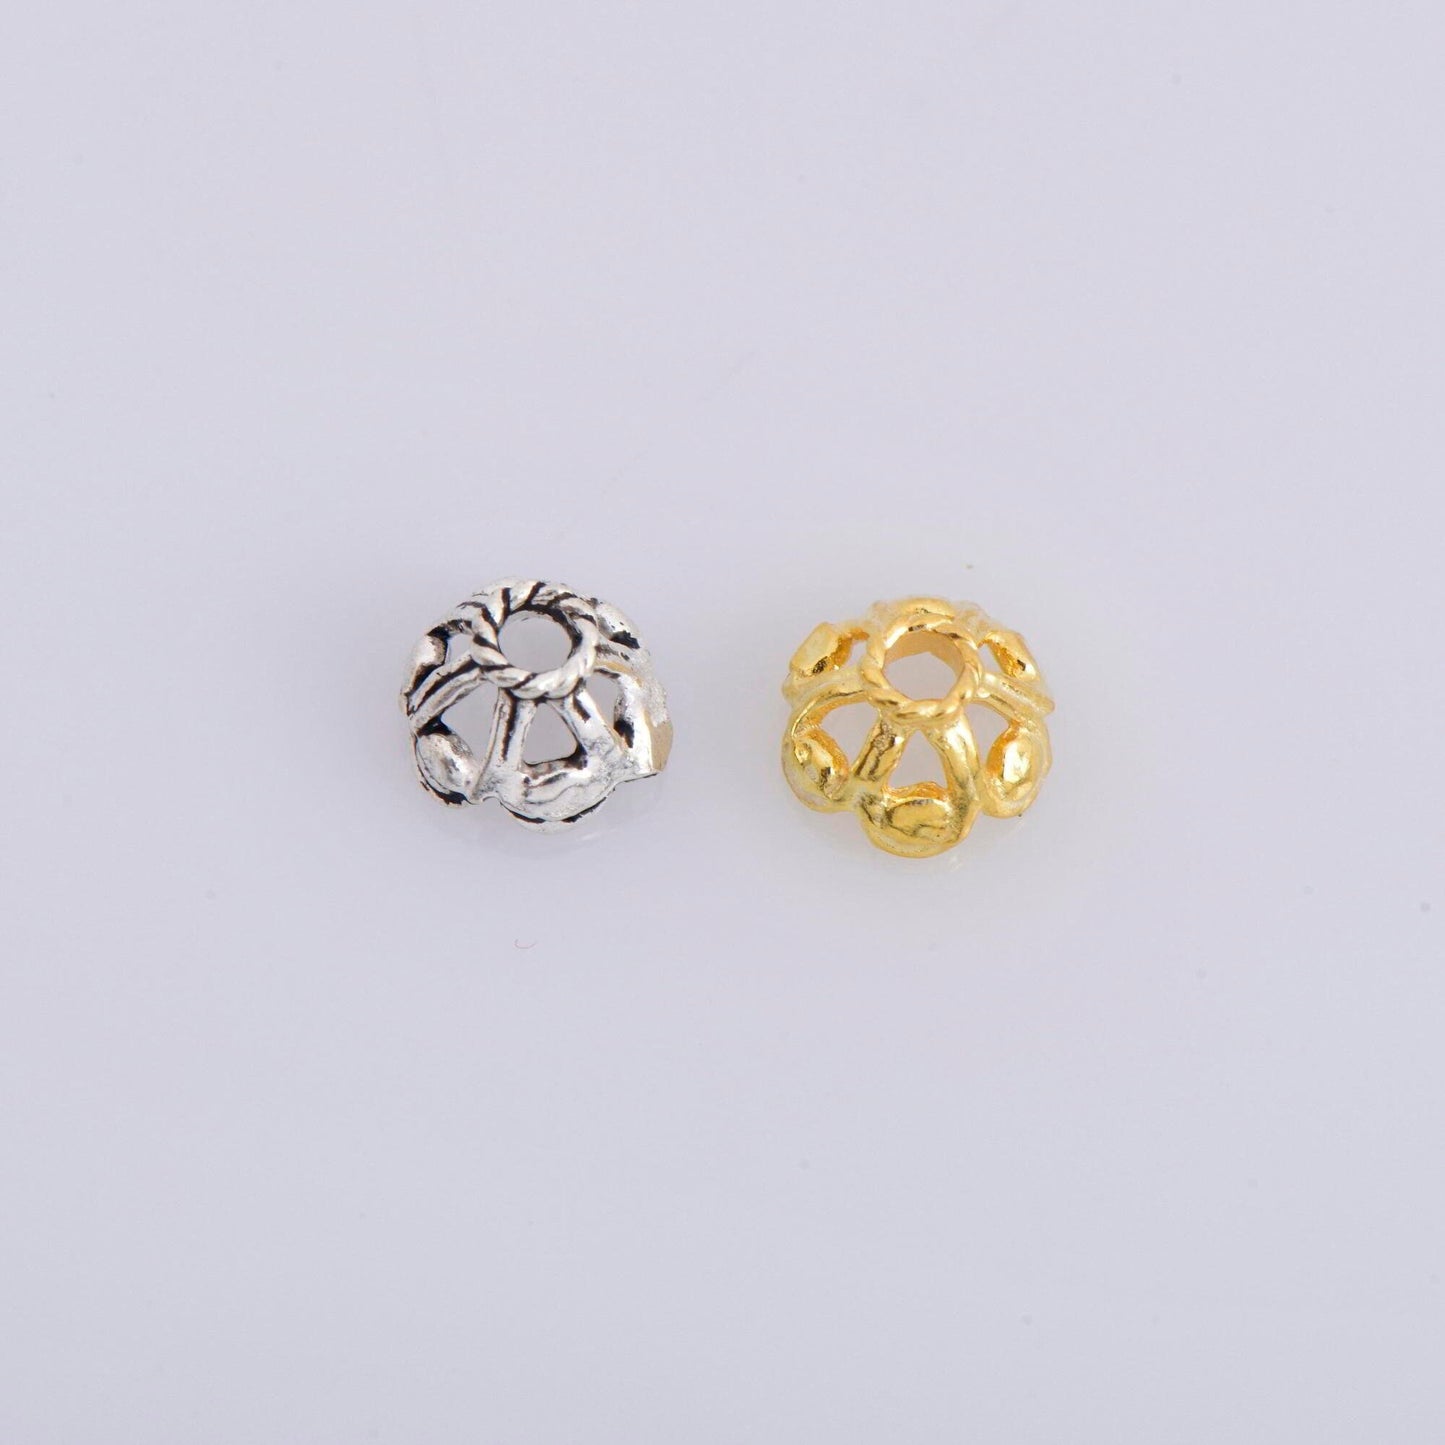 Sterling Silver 6.5mm Bead Caps, 925 Silver Bead Caps in 24K Gold Vermeil, 24K Gold Plated Bead Caps, Jewelry Spacer Bead Caps, VM9-M9